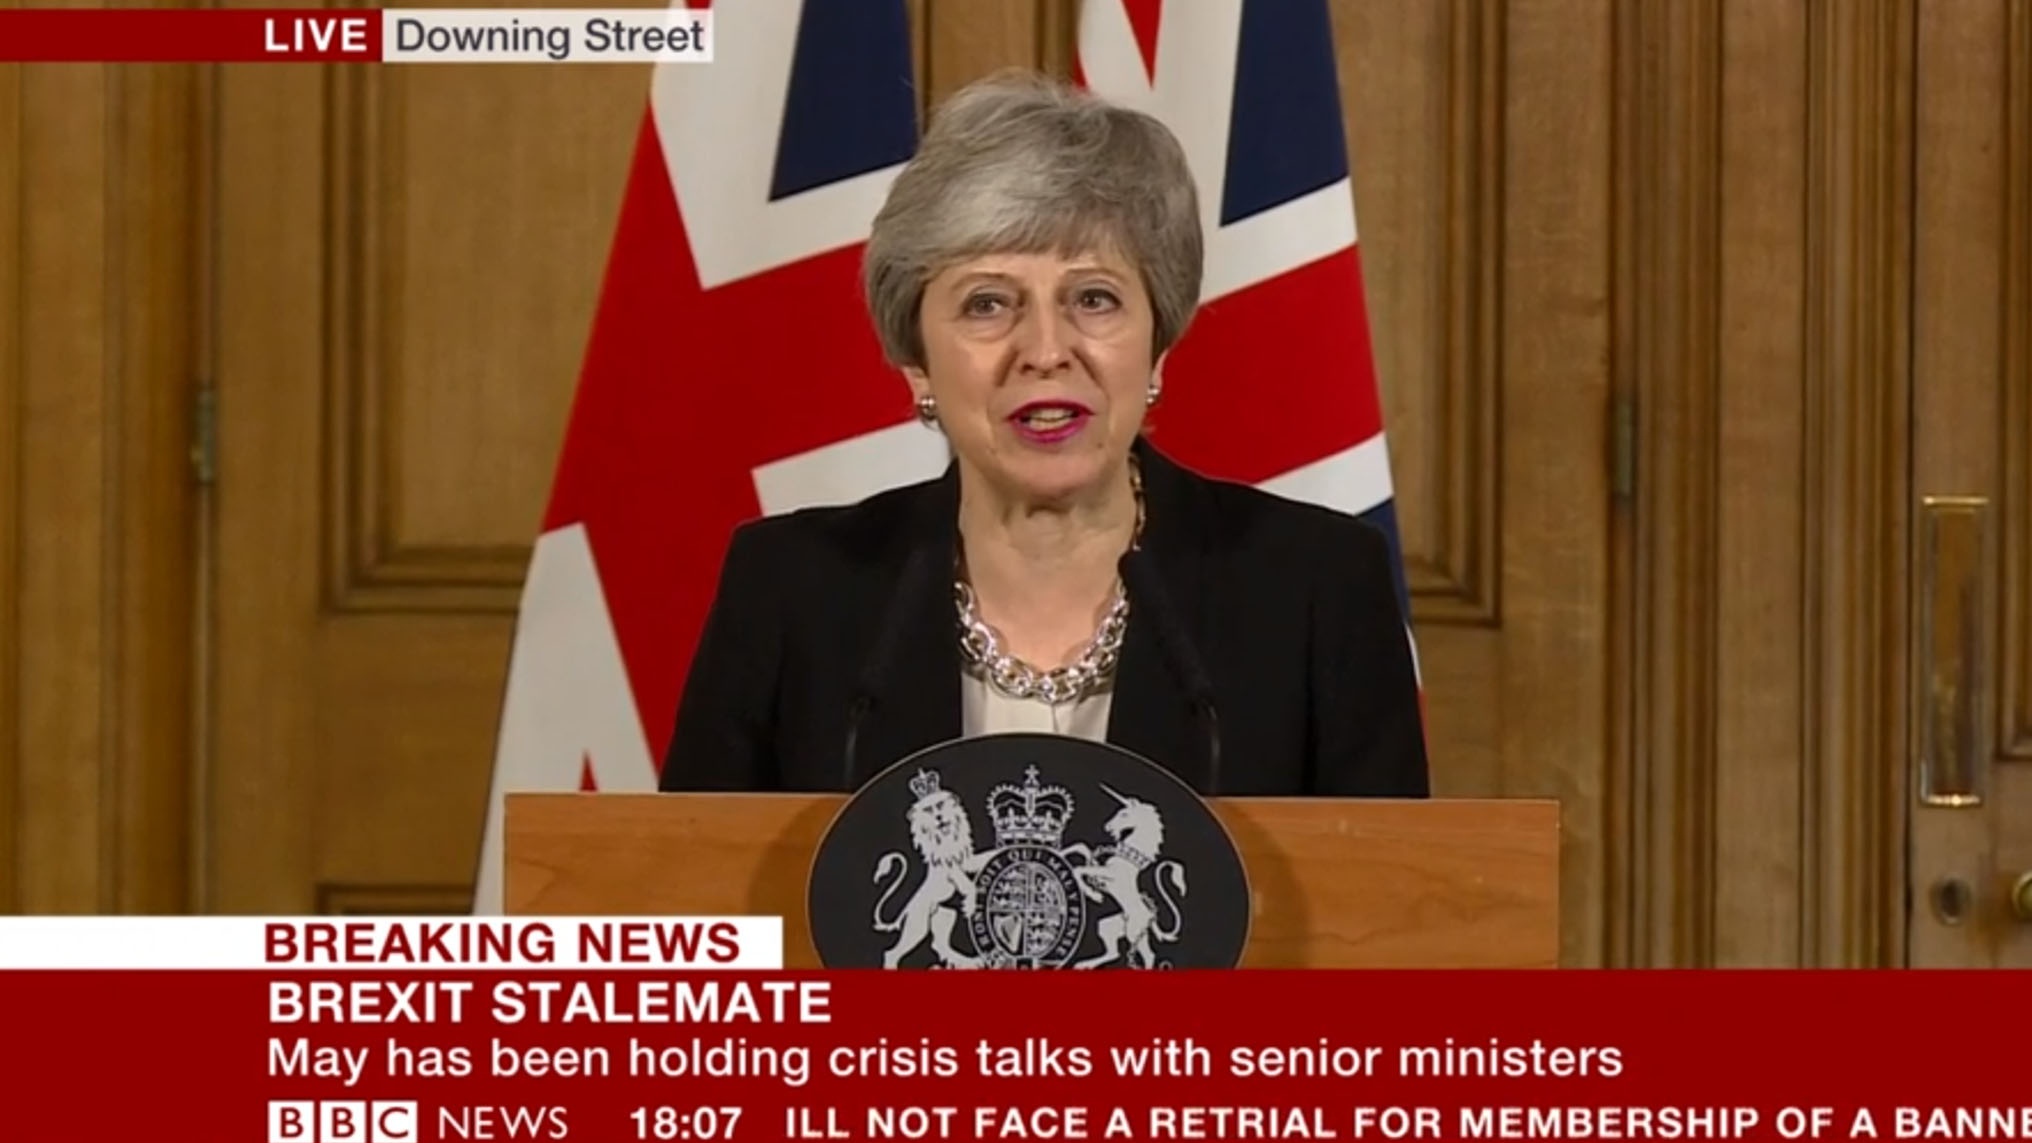 Theresa May spoke from inside Downing Street 